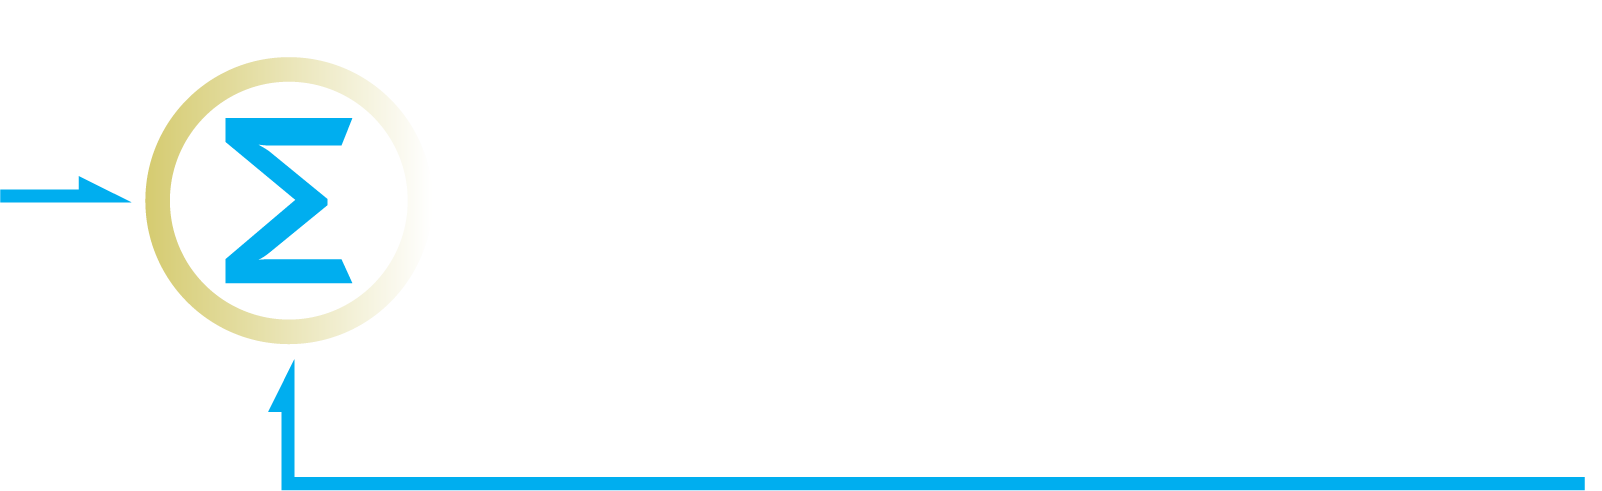 Integrated Controls & Engineering